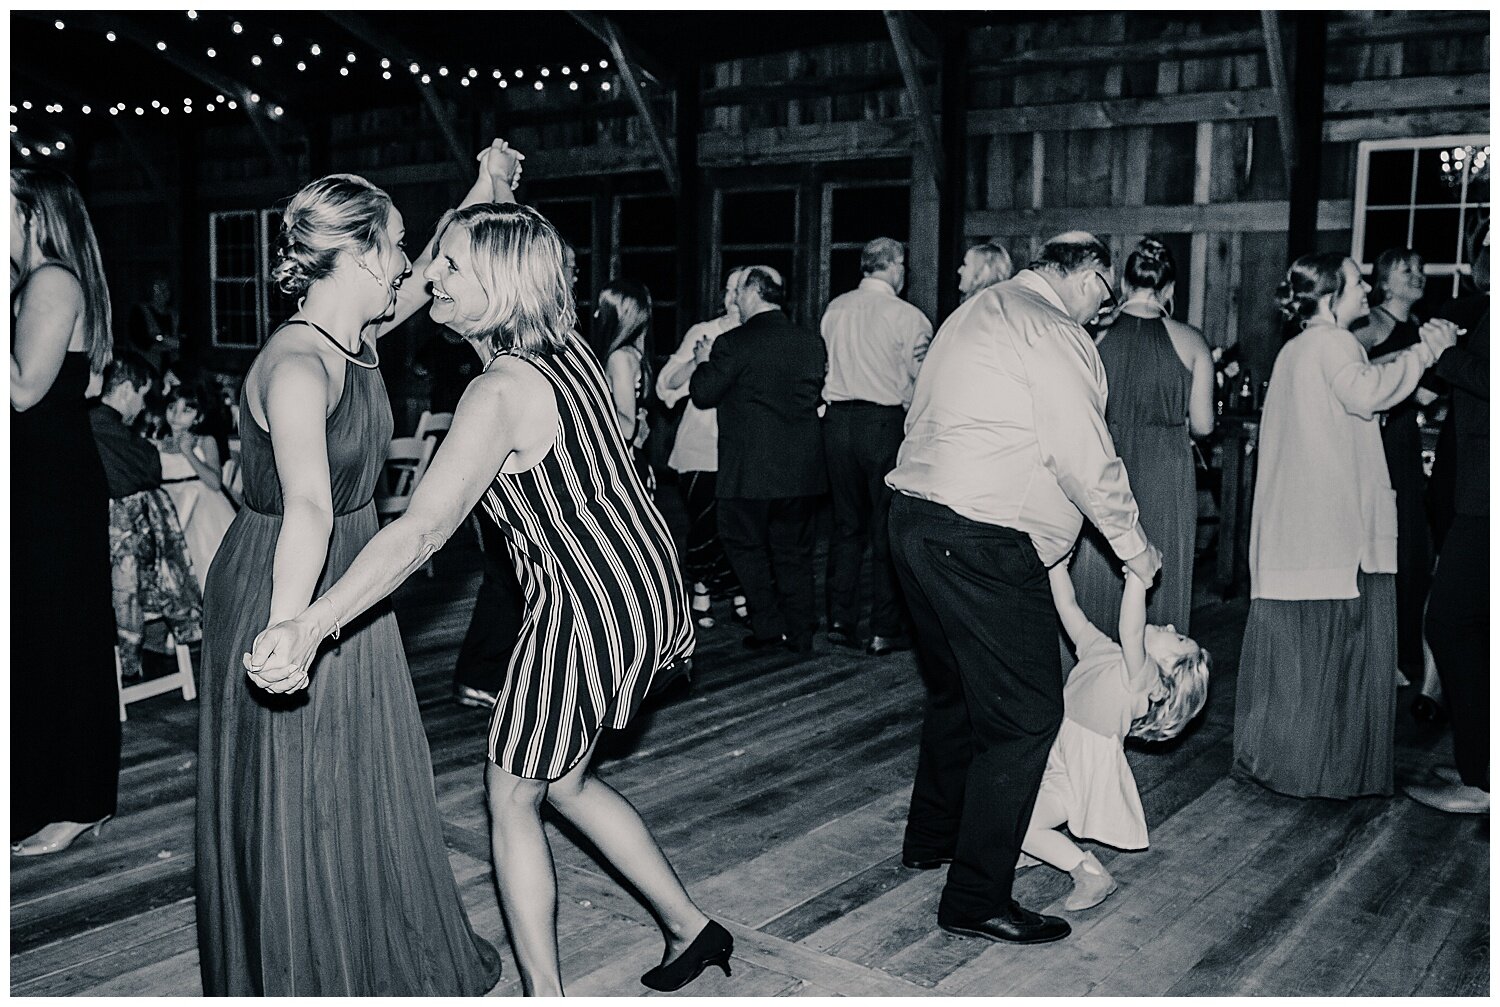  You guys… they did a polka at this wedding and now I firmly believe every wedding should include at least one polka! This was the most fun I’ve ever had on the dance floor!  